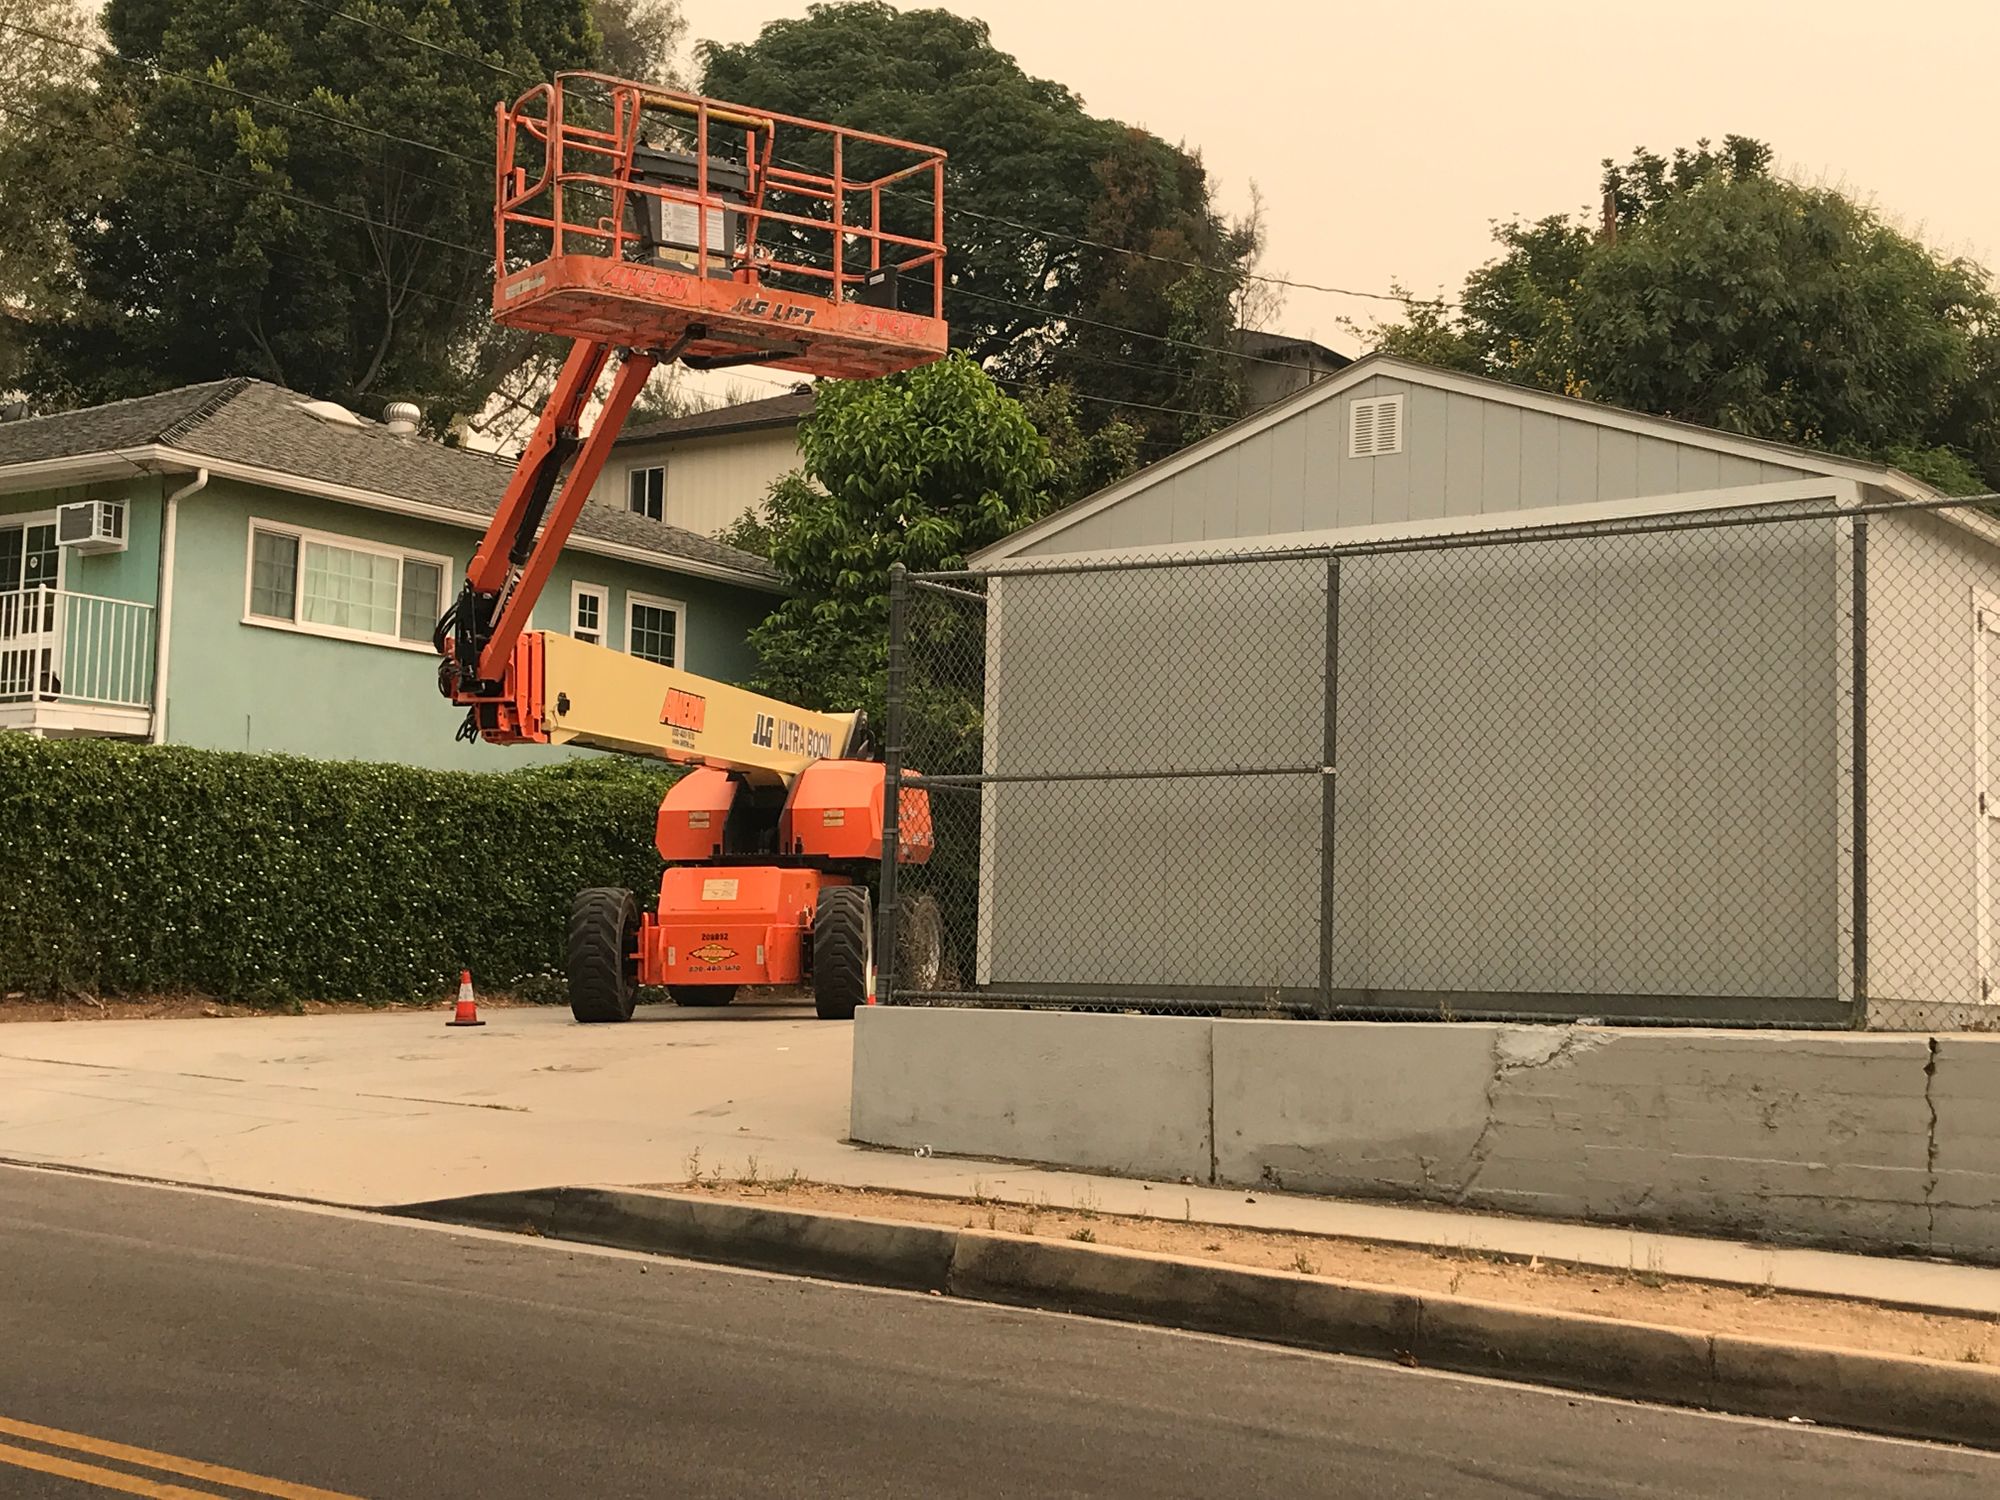 Update: Mobile Construction Equipment on Meridian Avenue